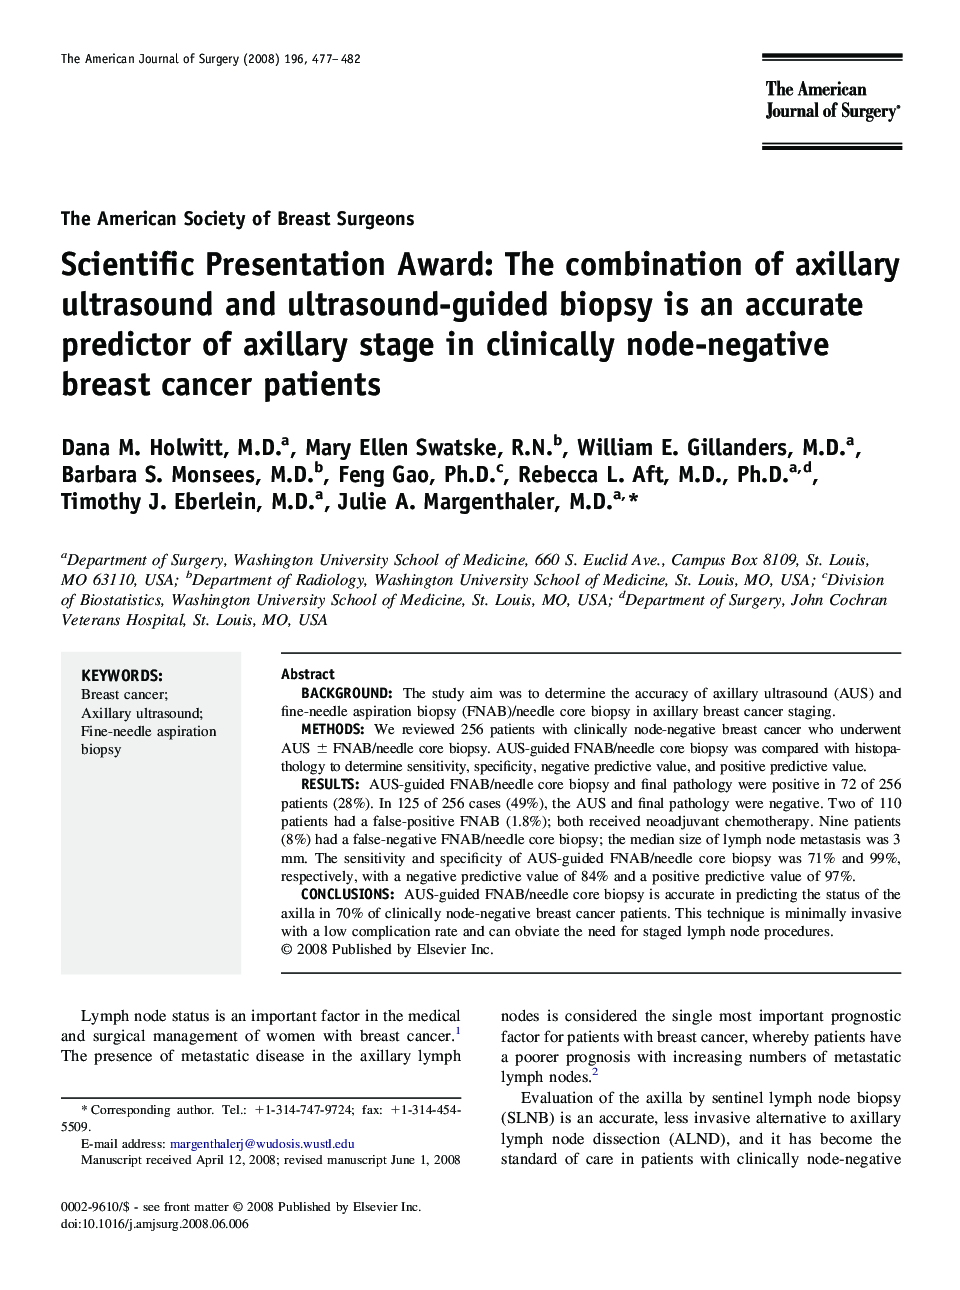 Scientific Presentation Award: The combination of axillary ultrasound and ultrasound-guided biopsy is an accurate predictor of axillary stage in clinically node-negative breast cancer patients